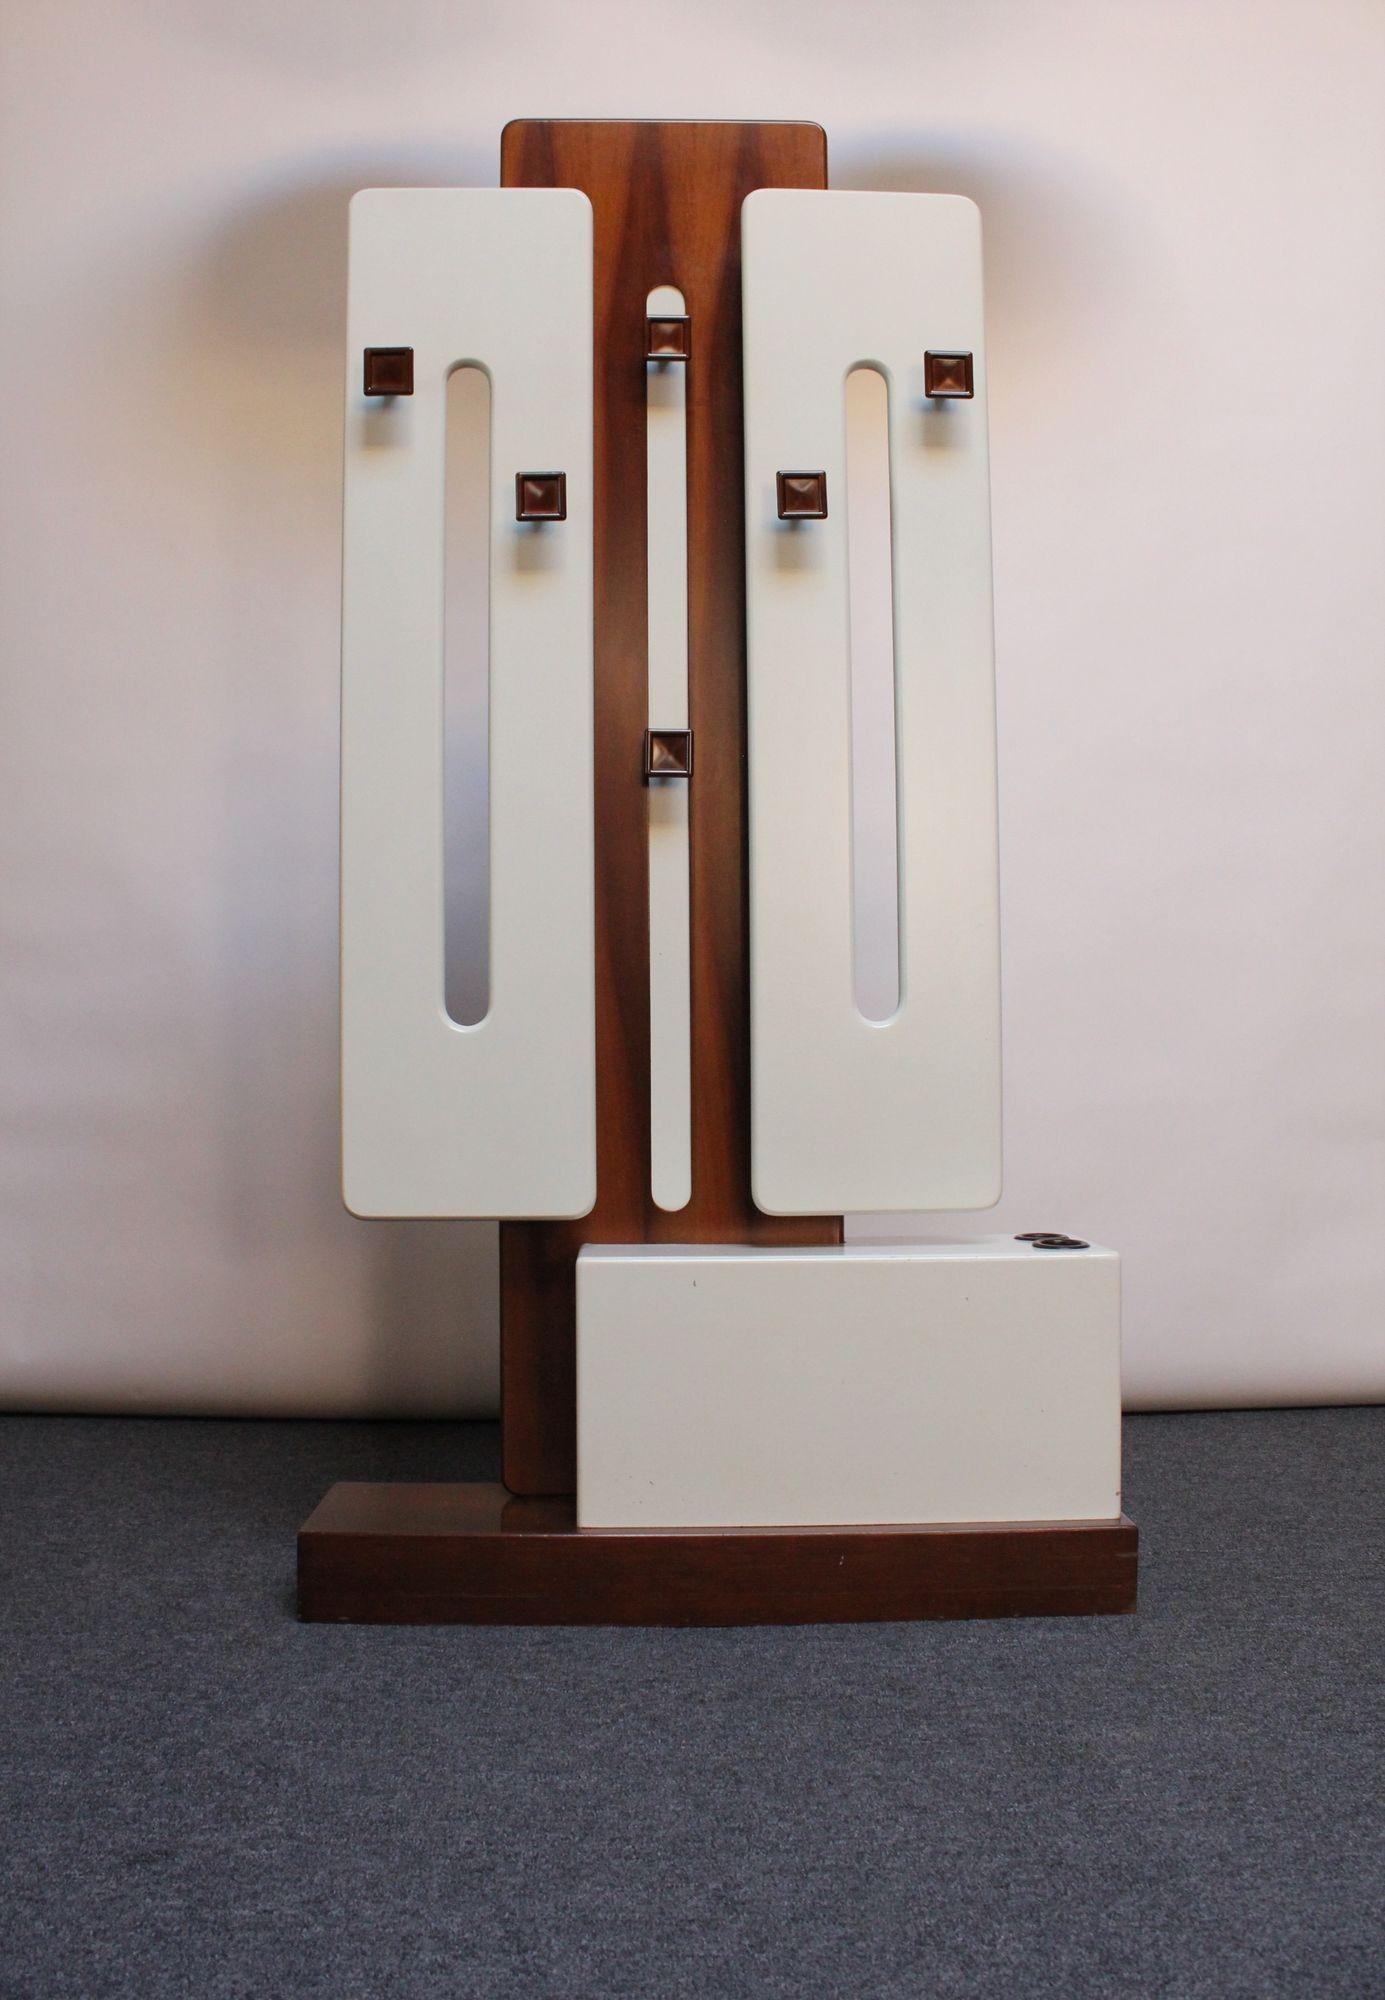 Luigi Sormani coat stand in lacquered walnut veneer, plastic, and laminate components (ca. 1970s, Italy). Composed of white laminate folding doors with plastic hooks on both sides supported by a dual-umbrella holder and lacquered walnut veneer